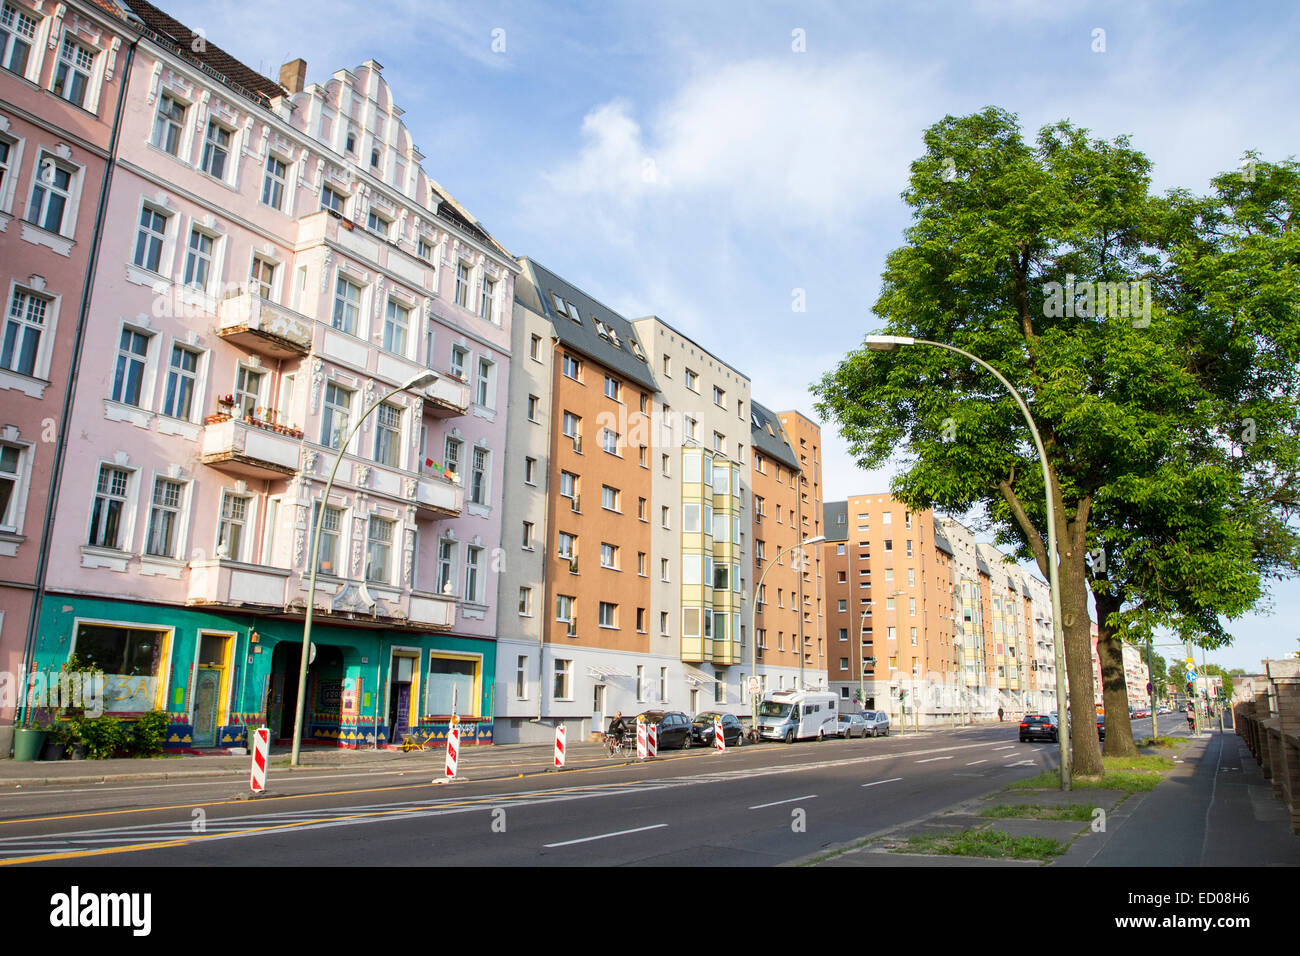 Colorful houses in Stralauer Allee, Berlin, Germany. Stock Photo